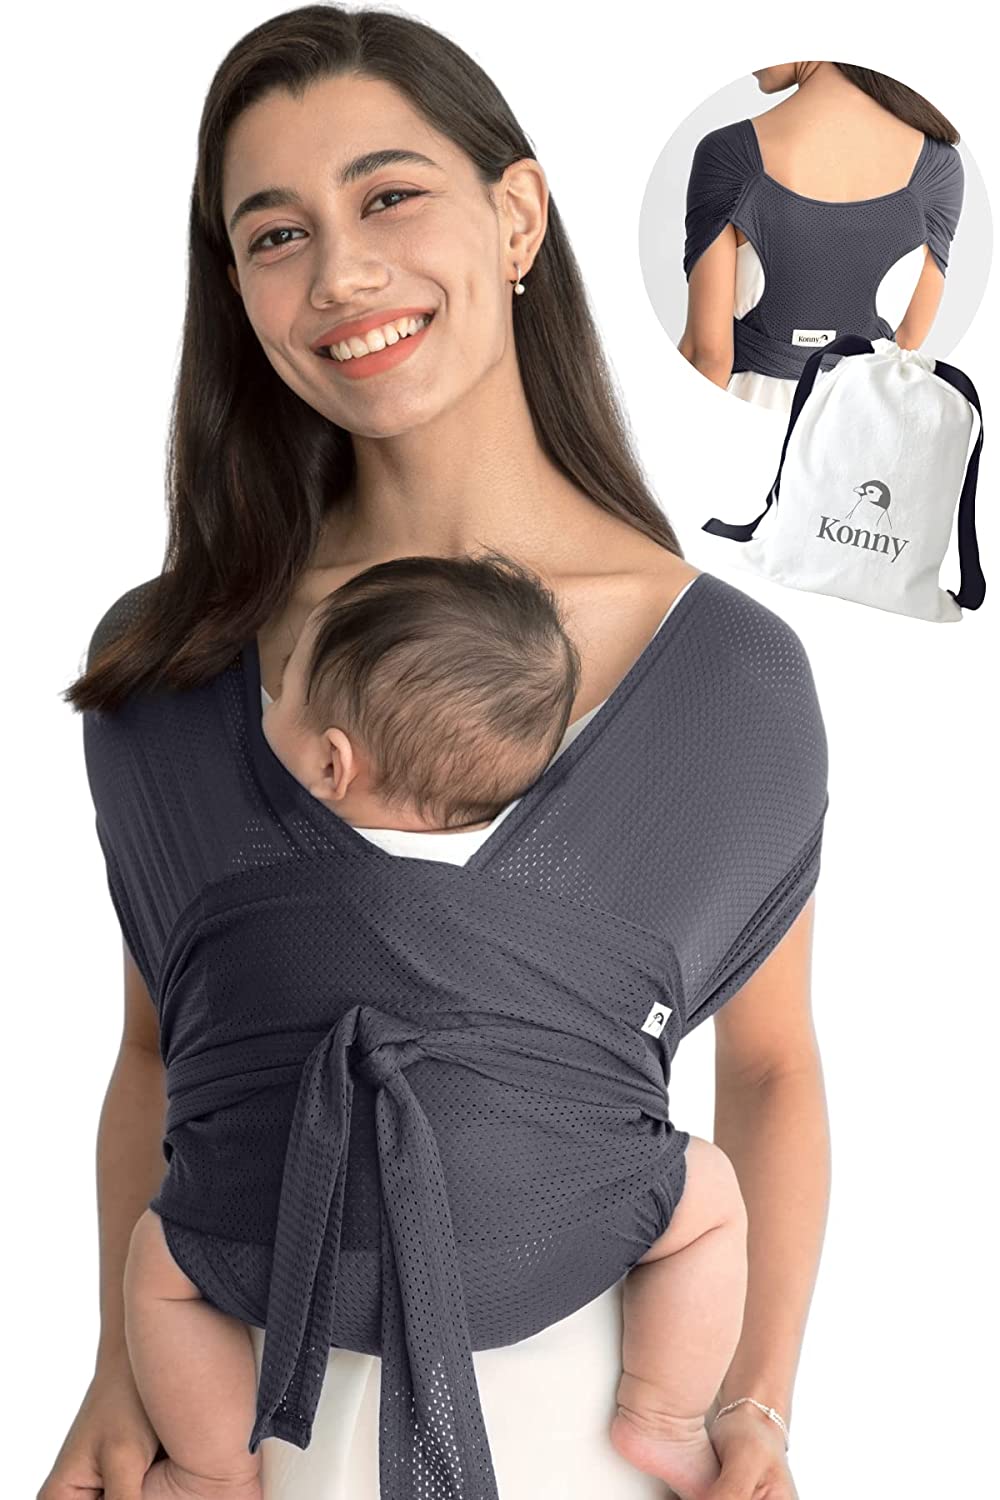 Konny Air Mesh Baby Carrier | Ultra Light, Hassle-Free Baby Wrap | Newborns, Infants up to 20 kg Toddlers | Cool and Breathable Fabric | Useful Sleep Solution (Anthracite, 3XL)